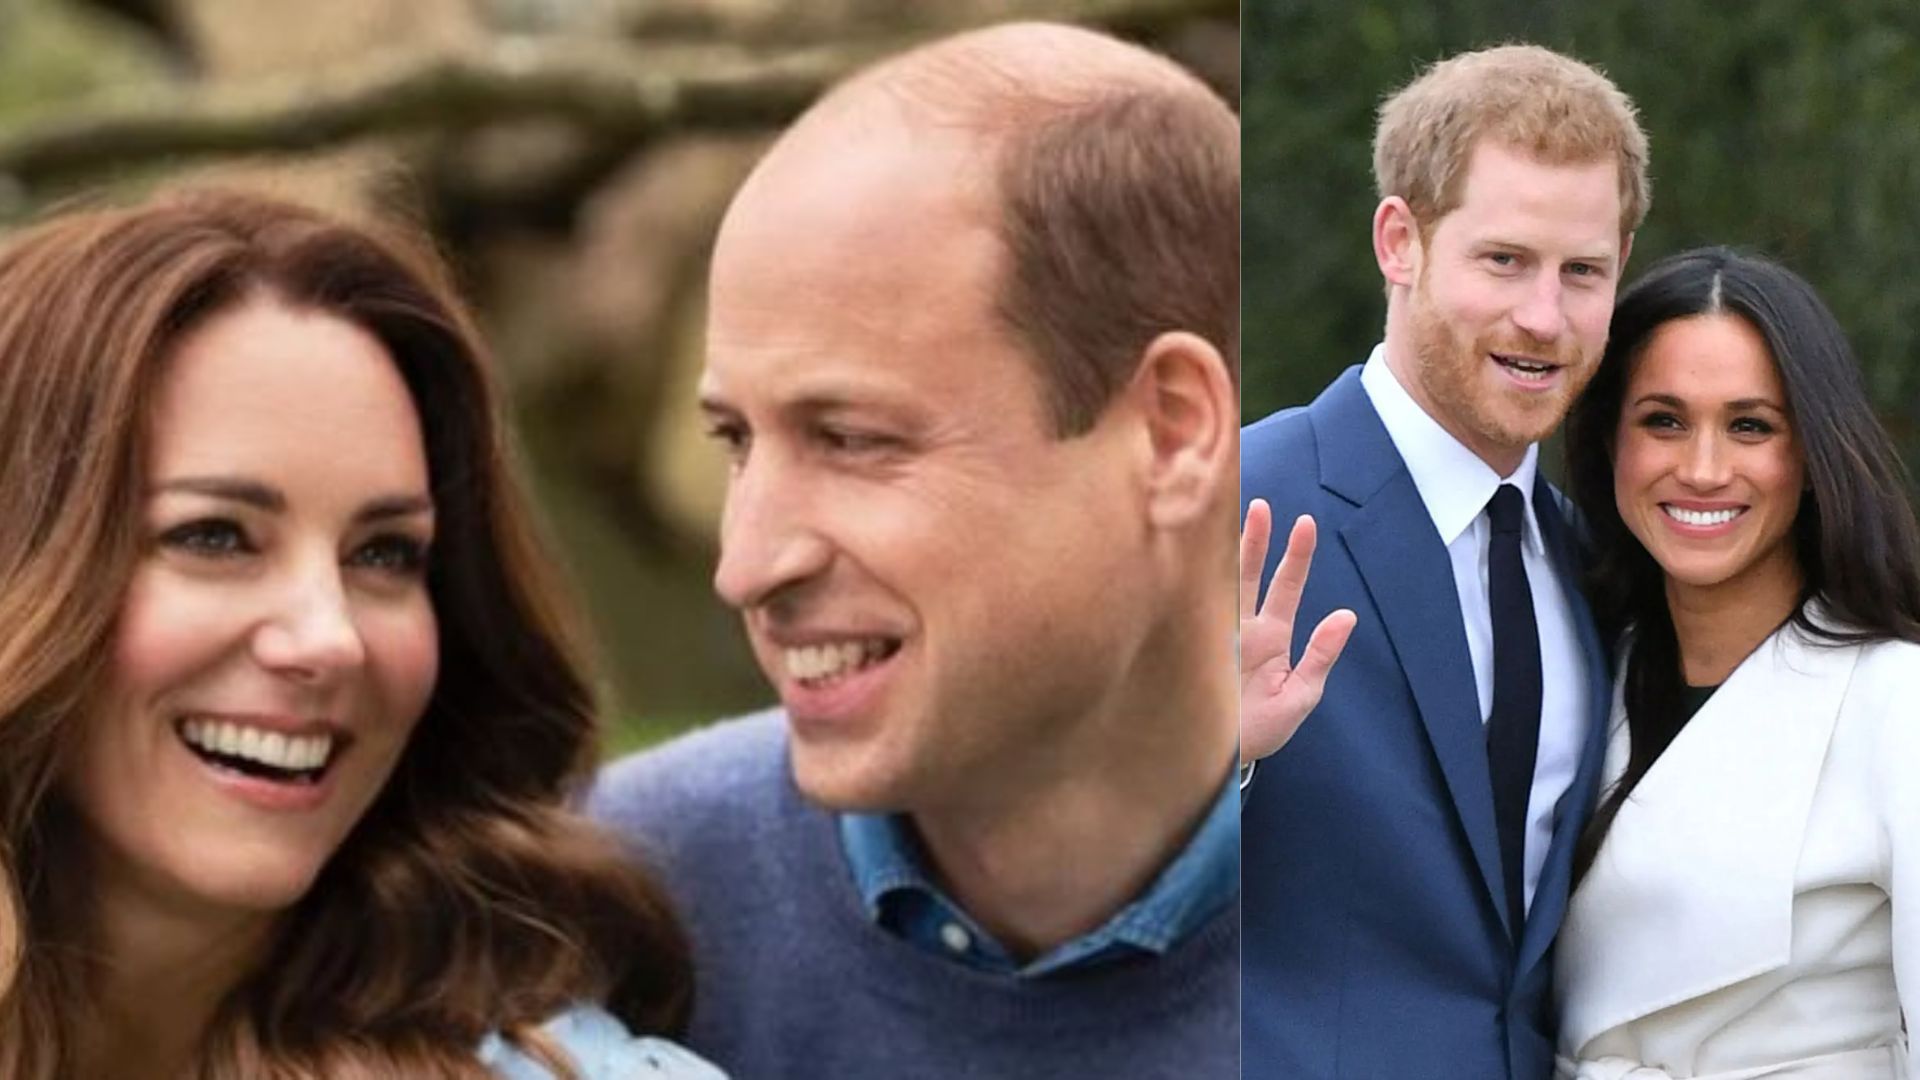 Kate Middleton, Prince William Not To Meet Prince Harry During Their Visit To UK: Source